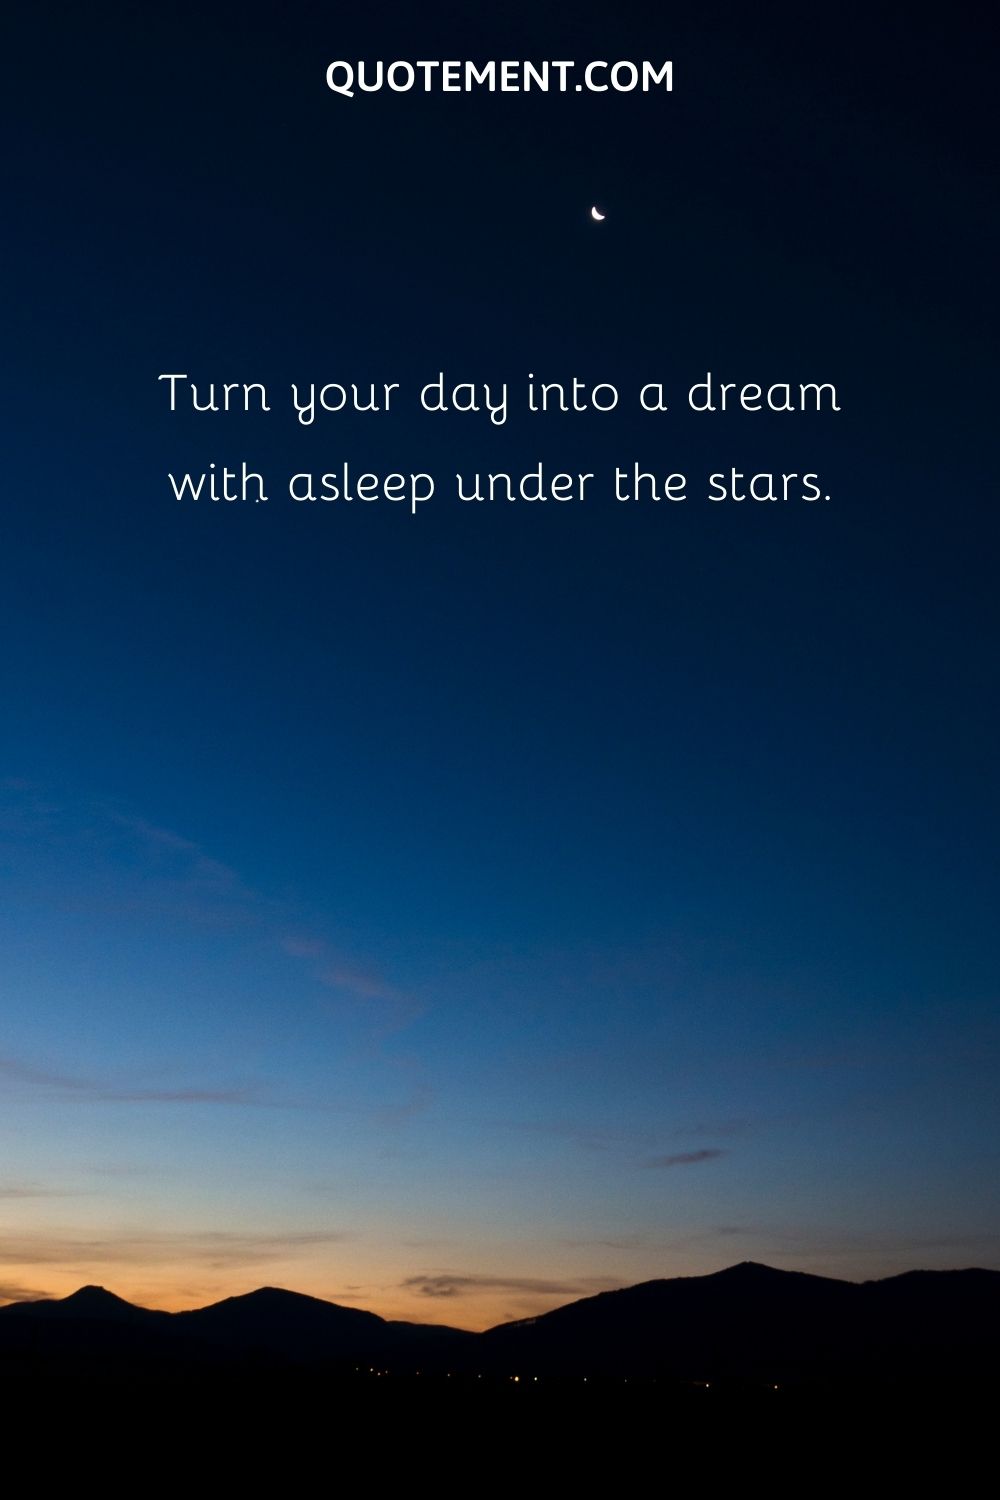 Turn your day into a dream with asleep under the stars